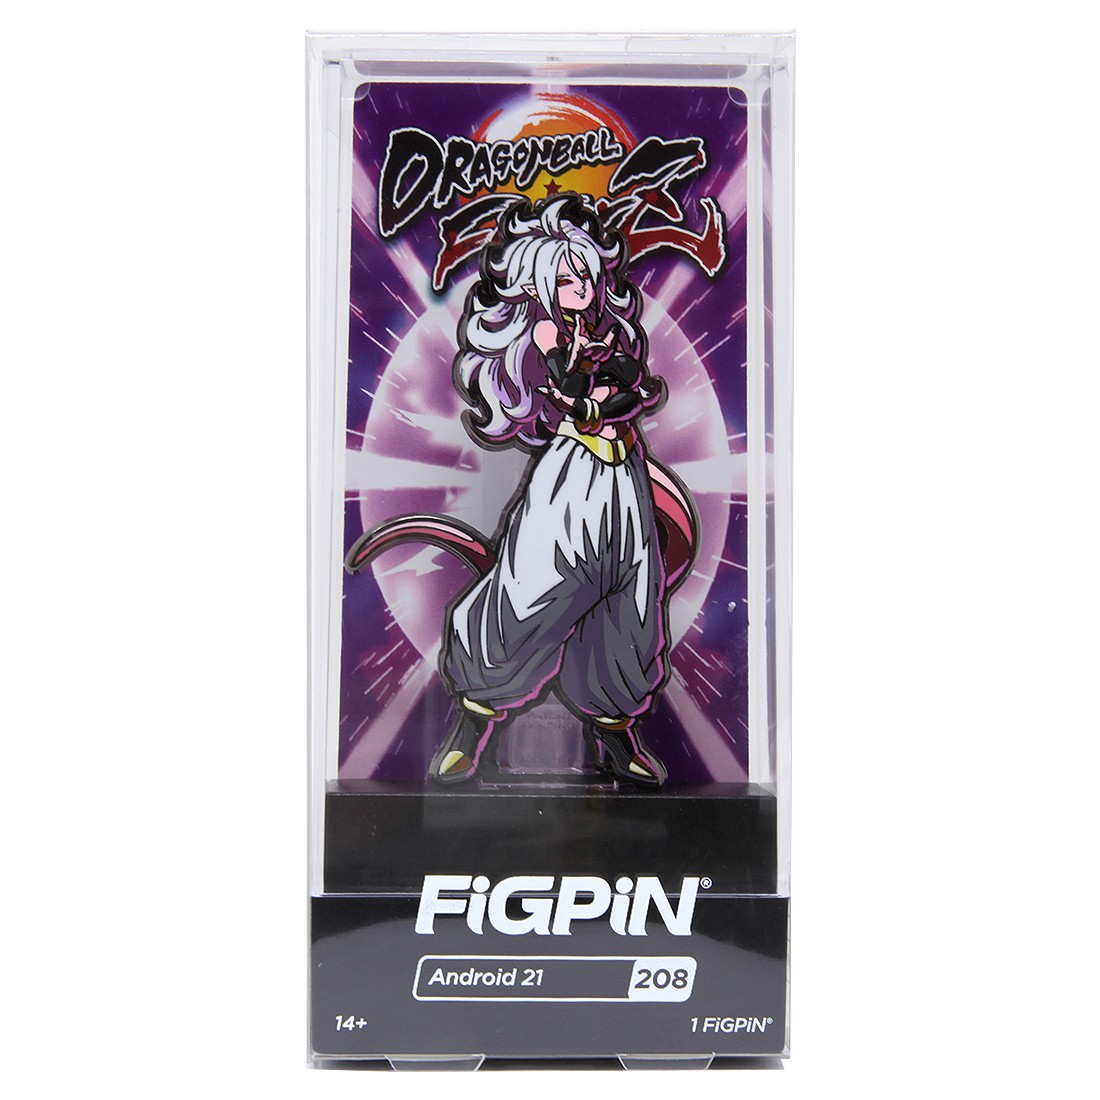 FiGPiN Dragon Ball FighterZ Android 21 #208 (white)